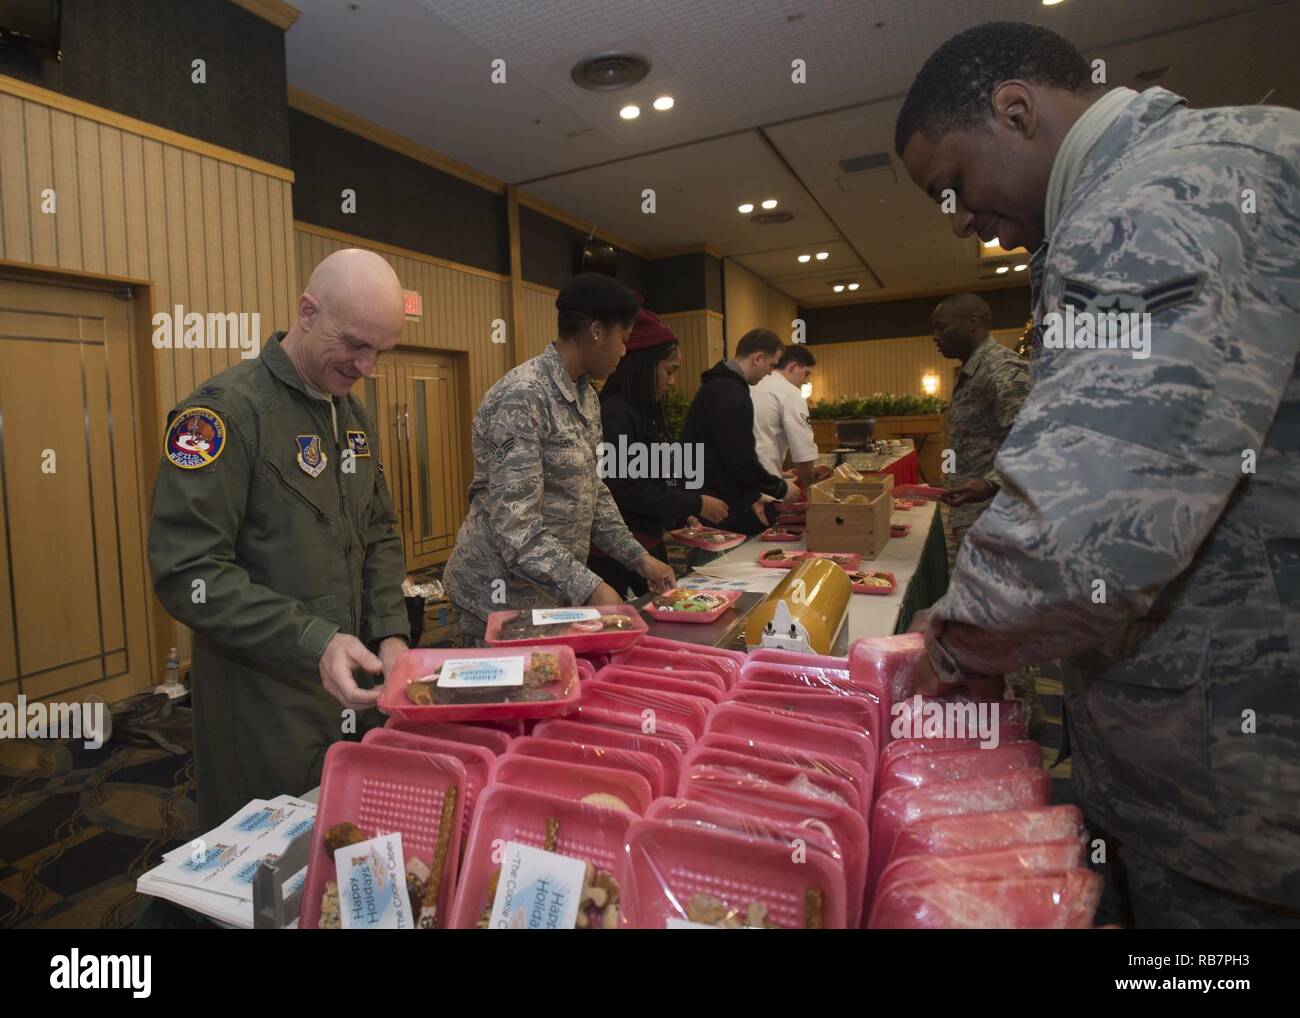 U.S. Air Force Col. R. Scott Jobe, 35th Fighter Wing commander, assists Airmen package cookies during the annual Cookie Caper event at Misawa Air Base, Japan, Dec. 7, 2016.  Preparation began two days prior when volunteers baked donated dough at the Commissary and collected baked cookies from around the Misawa community for packaging. Stock Photo